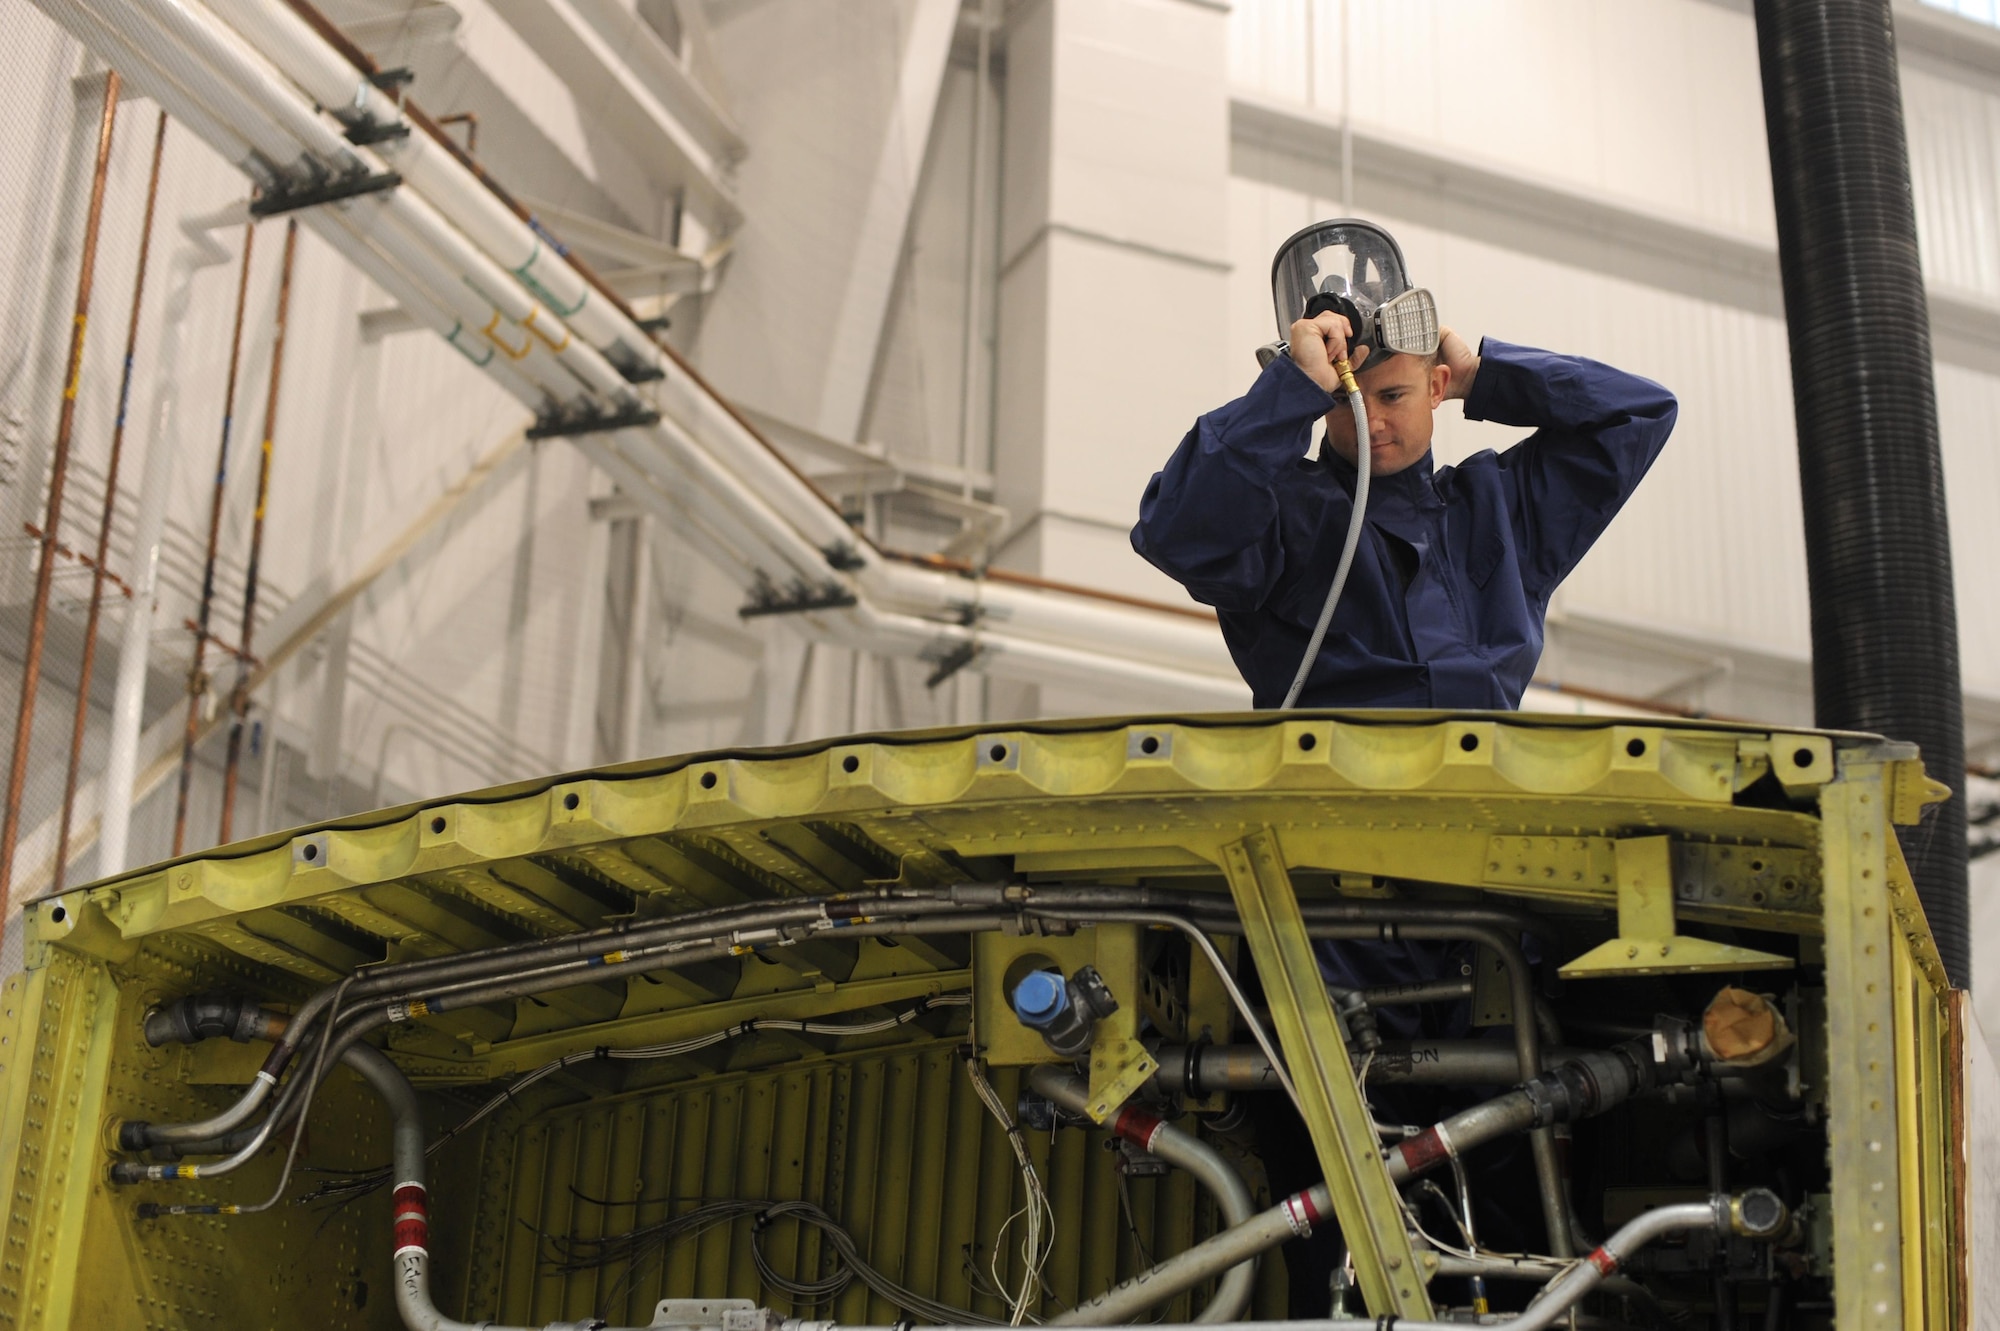 U.S. Air Force Senior Airman Timothy Thompson, 19th Maintenance Squadron Fuel Systems journeyman, prepares to enter a mock fuel tank March 29, 2017, at Little Rock Air Force Base, Ark. It’s the team’s responsibility to make repairs after a fuel leak is suspected. (U.S. Air Force photo by Airman 1st Class Grace Nichols)